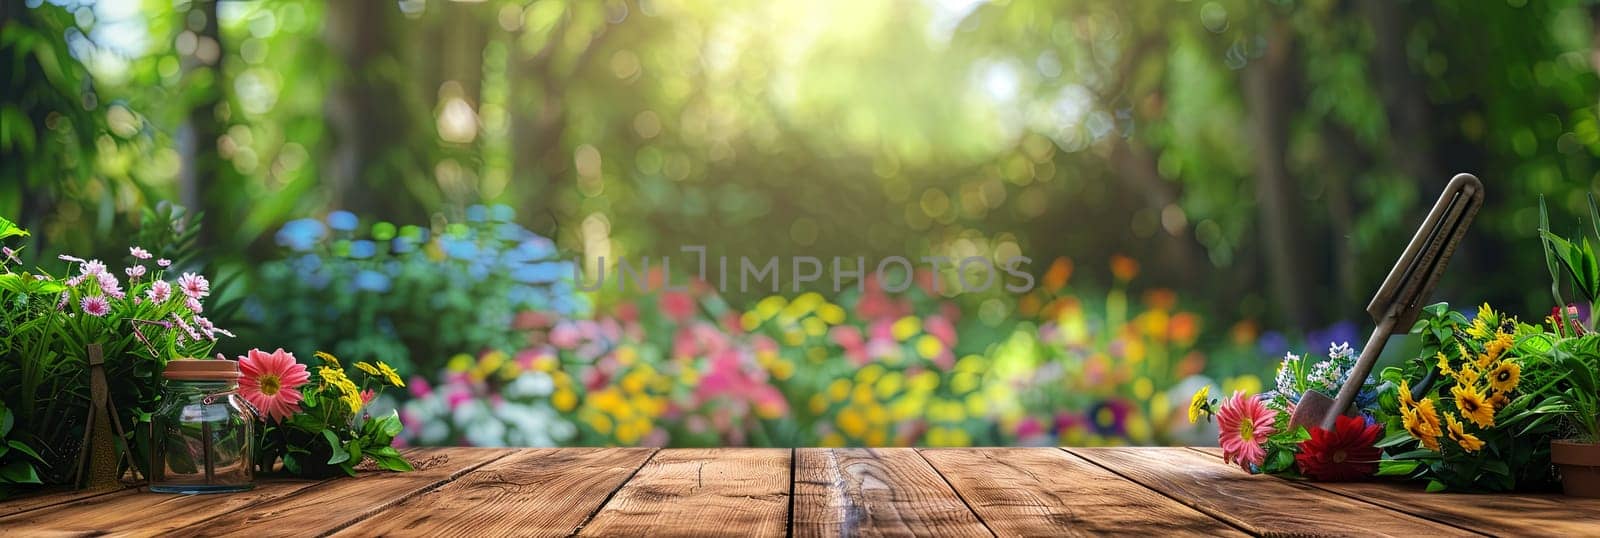 A wooden table adorned with an assortment of vibrant flowers and garden tools on a blurred natural backdrop.